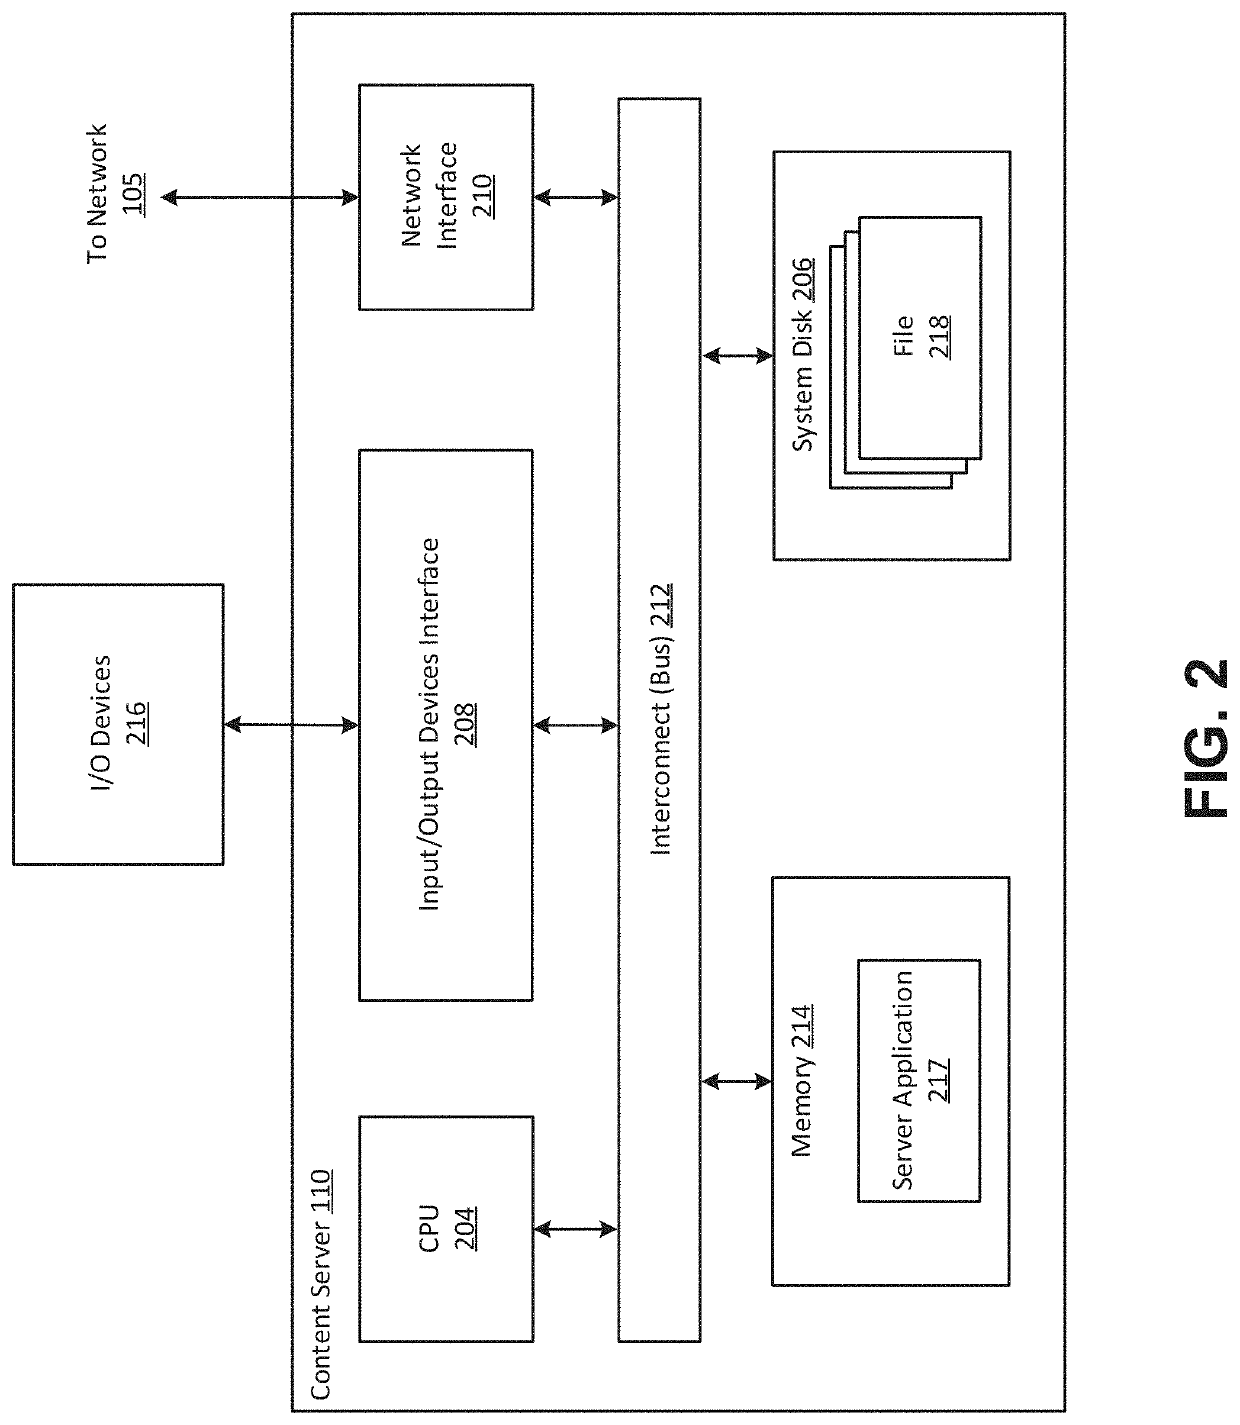 Adaptive retrieval of objects from remote storage